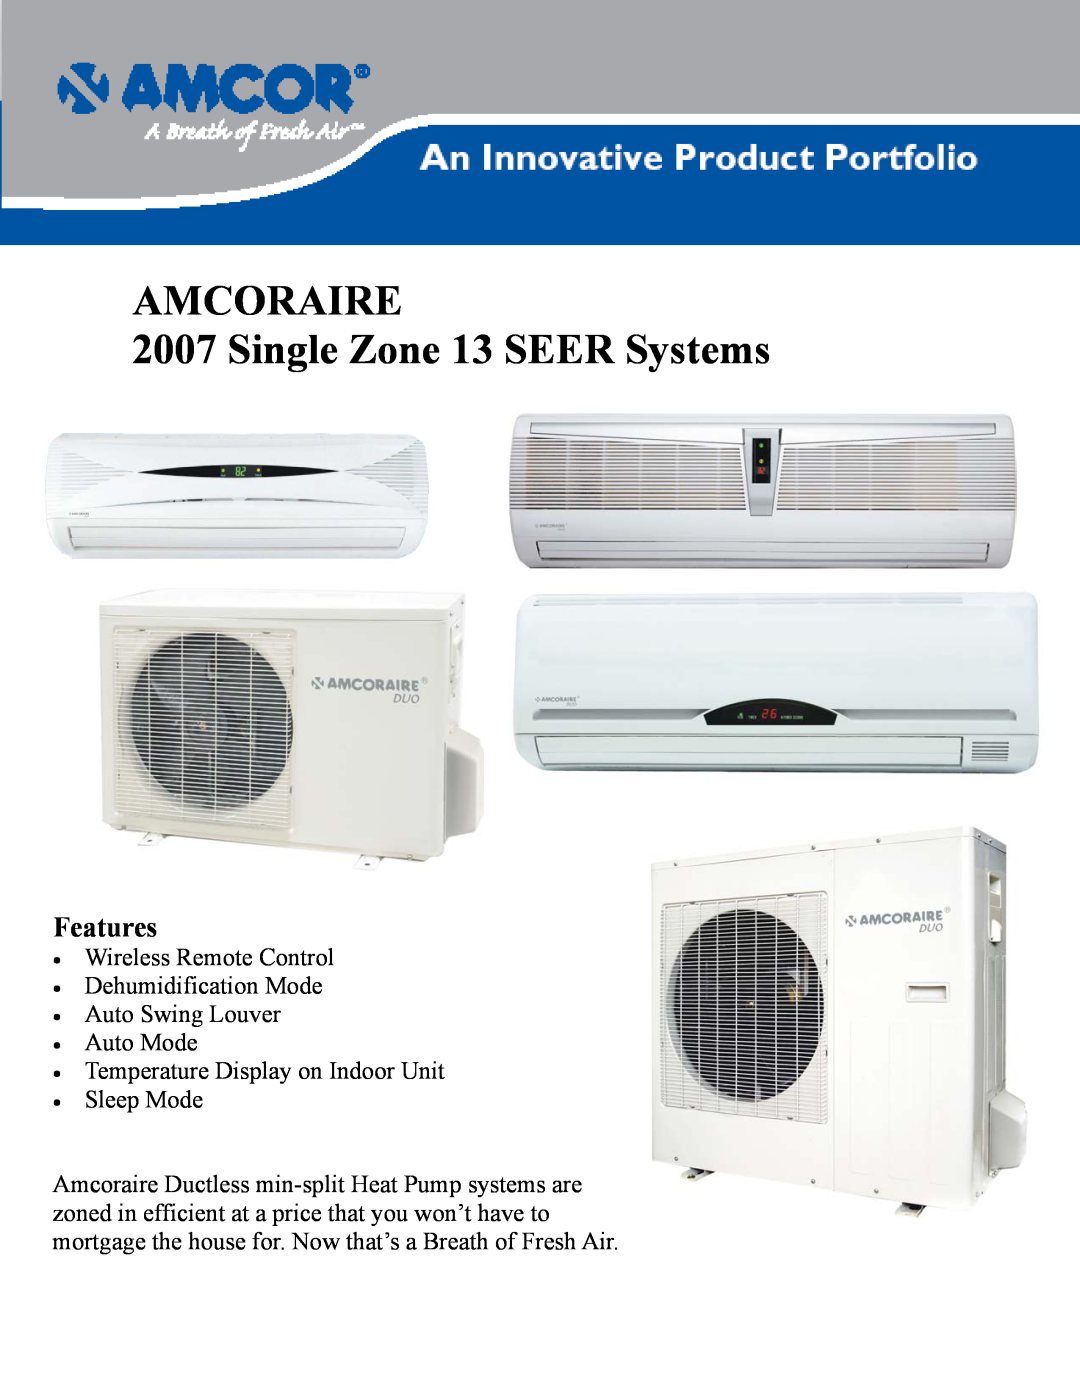 Amcor UCHW-H24AF2, UCHW-H18CF2 manual AMCORAIRE 2007 Single Zone 13 SEER Systems, Features, Auto Swing Louver Auto Mode 